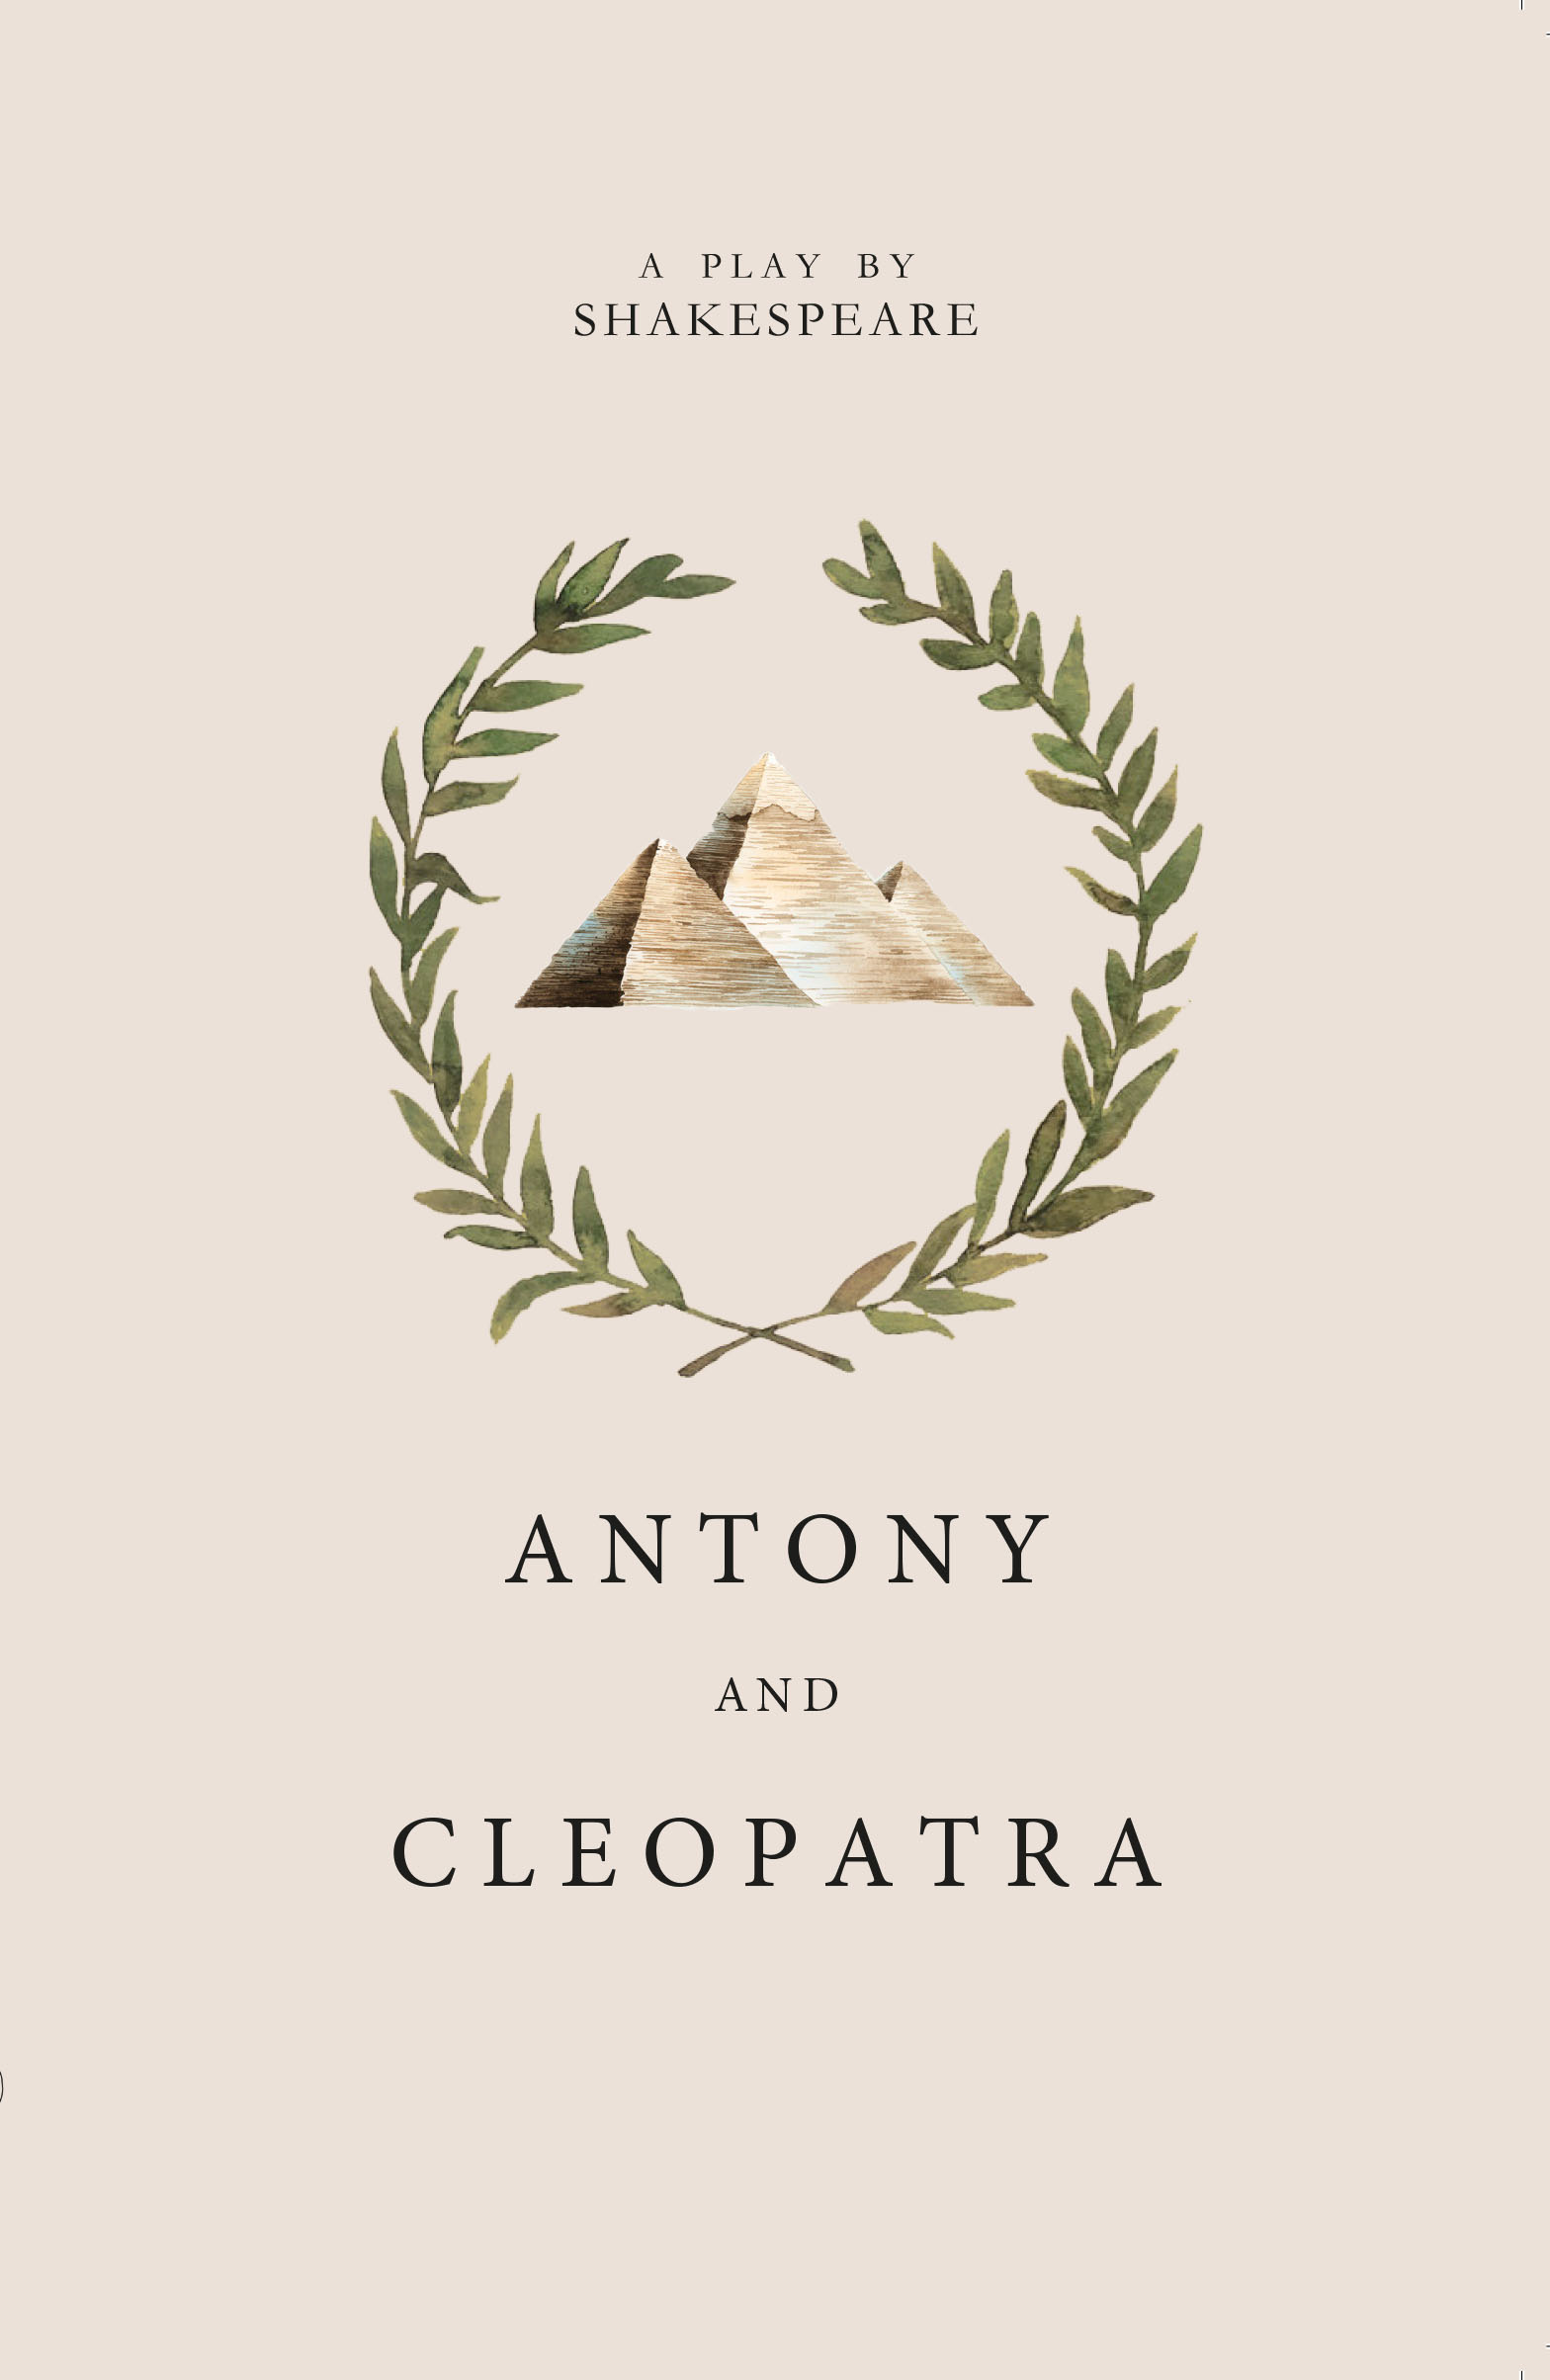 Antony and Cleopatra cover with illustration of pyramid and plant